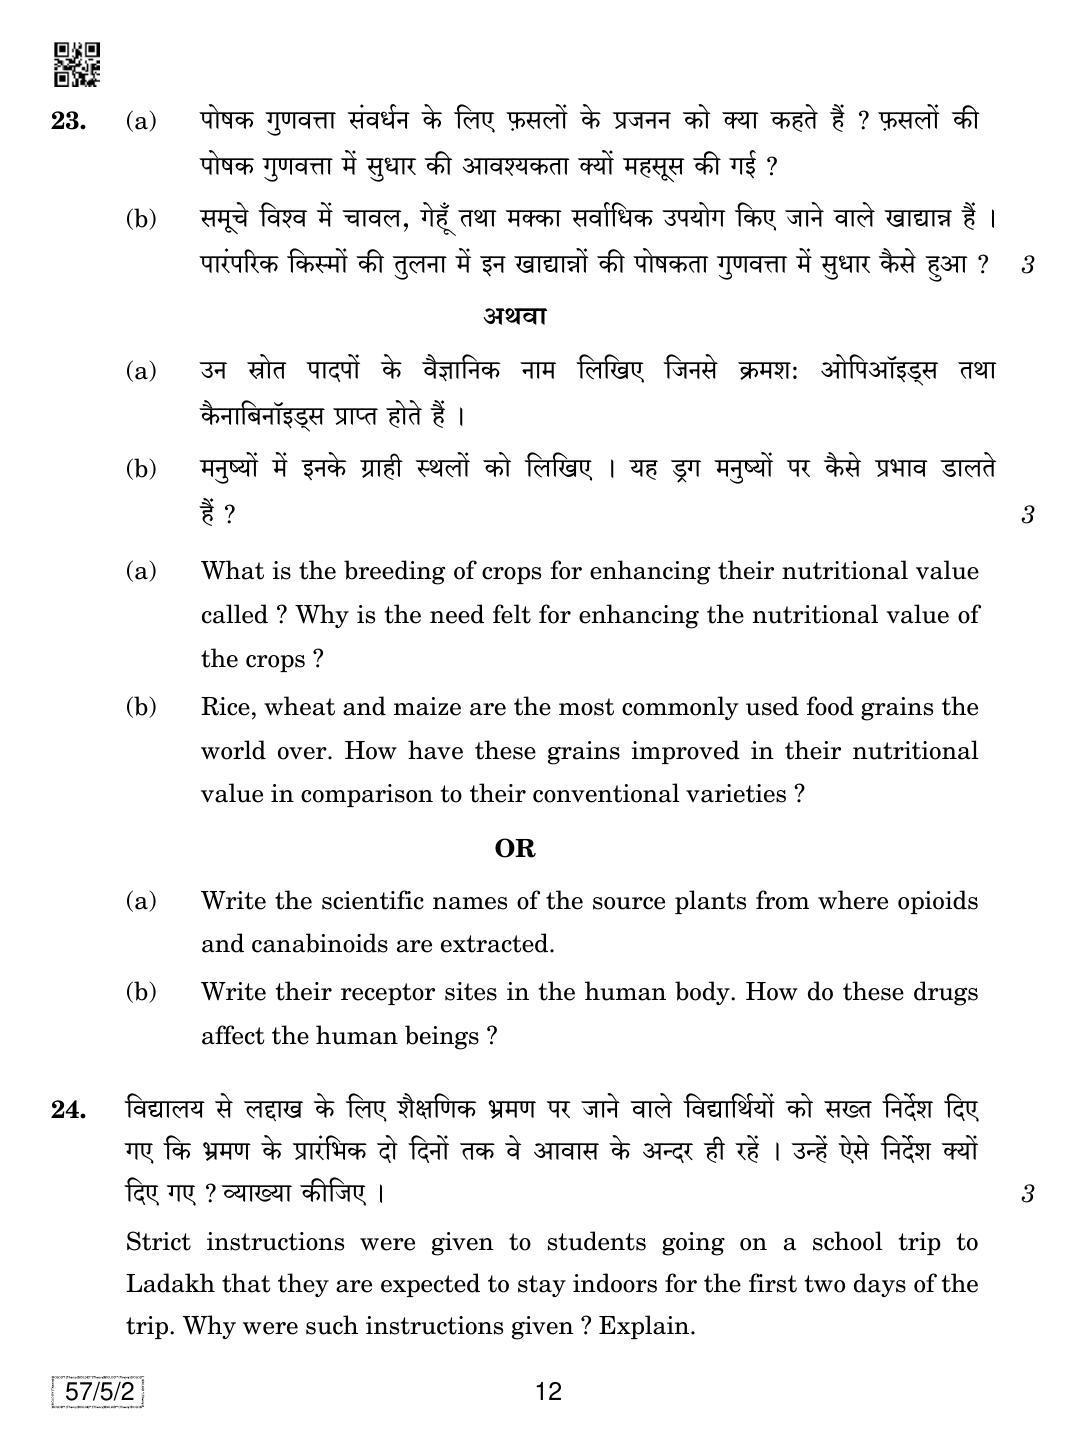 CBSE Class 12 57-5-2 Biology 2019 Question Paper - Page 12